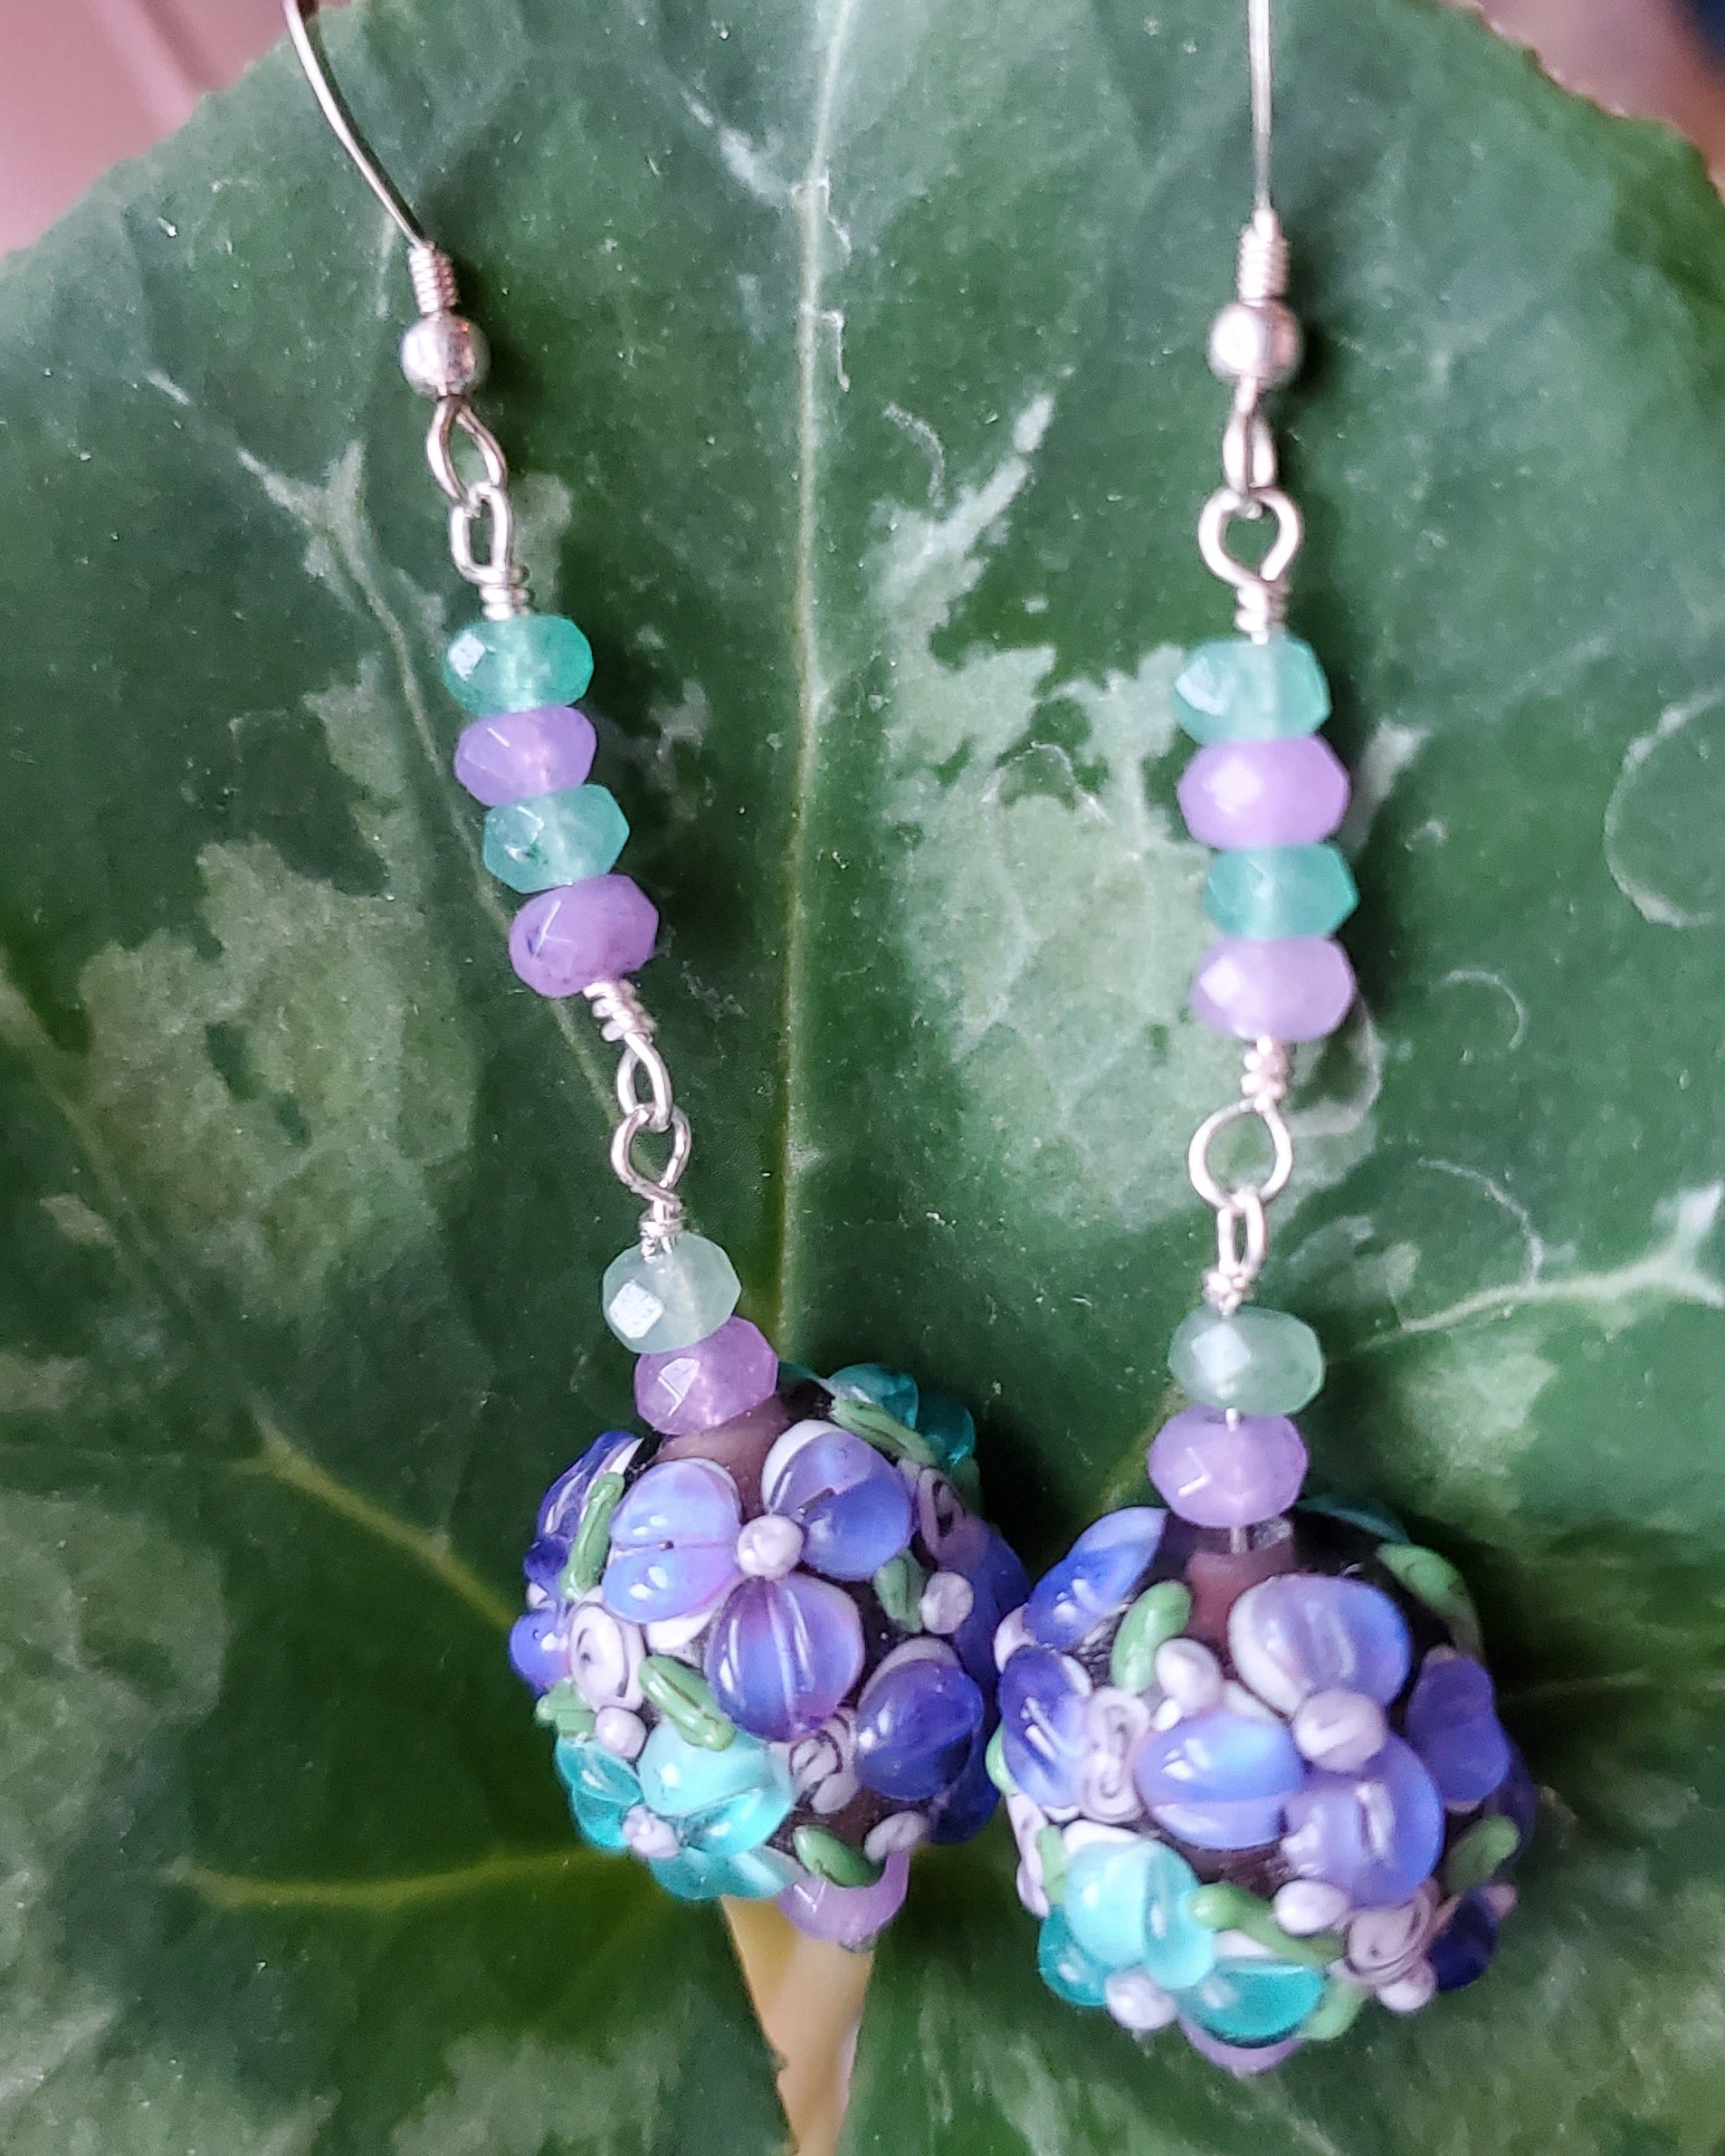 Long Lavender Flower Garden Earrings, Sterling Silver, Large round Floral Lampwork Glass beads with lavender purple and turquoise blue flowers, they dangle below a long stream of blue and lavender Quarts Stone, displayed on green Leaf